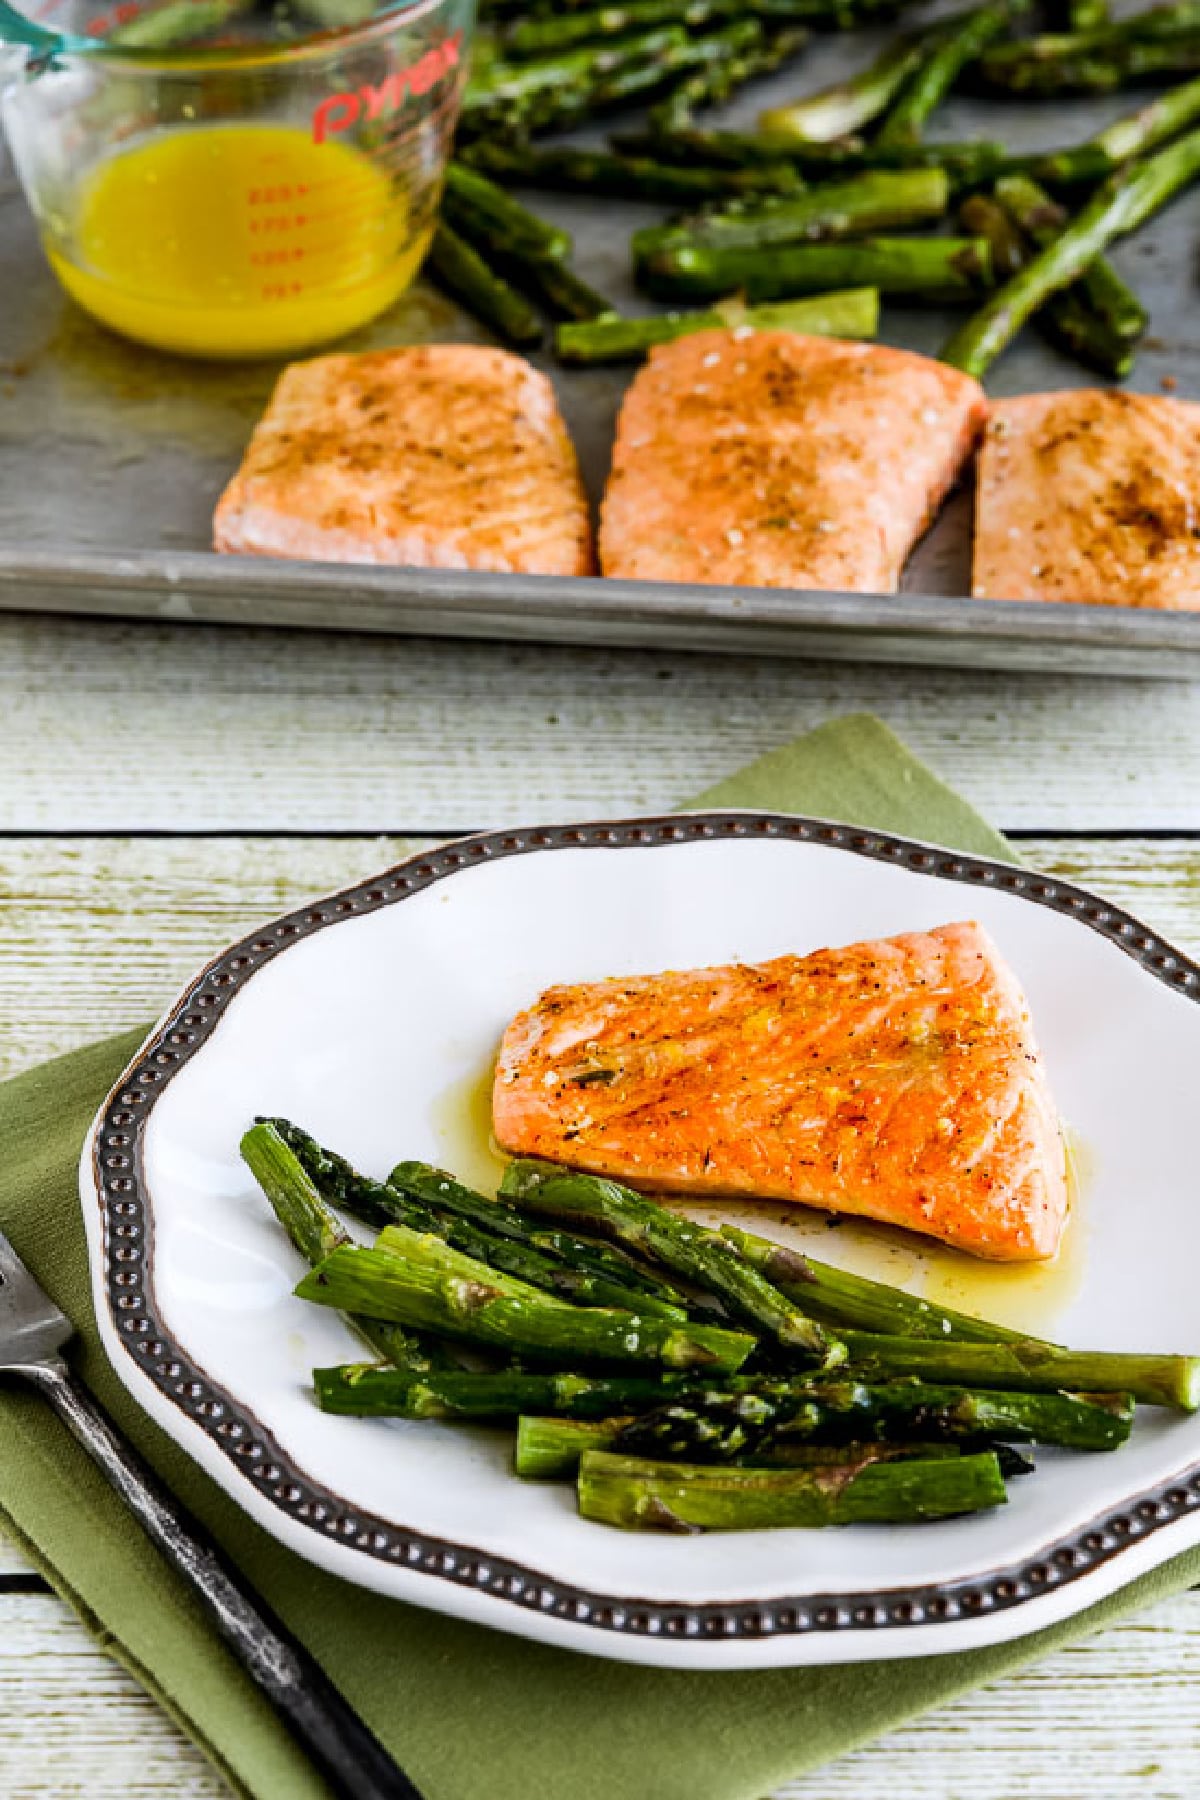 Salmon and Asparagus Sheet Pan Meal with one serving on plate and sheet pan in back.